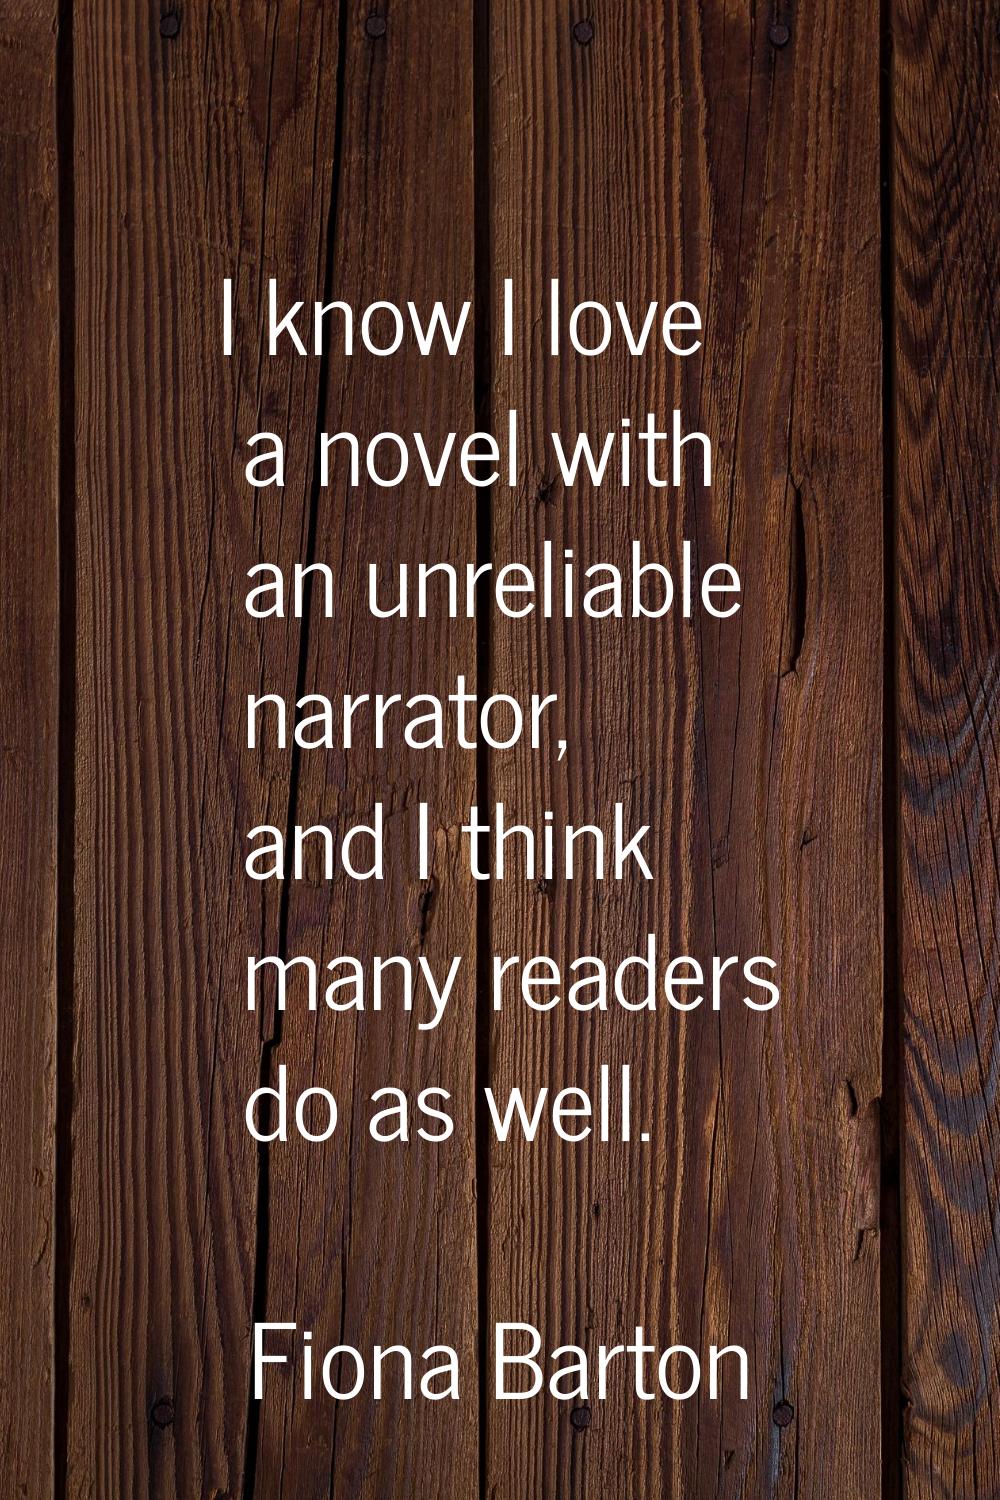 I know I love a novel with an unreliable narrator, and I think many readers do as well.